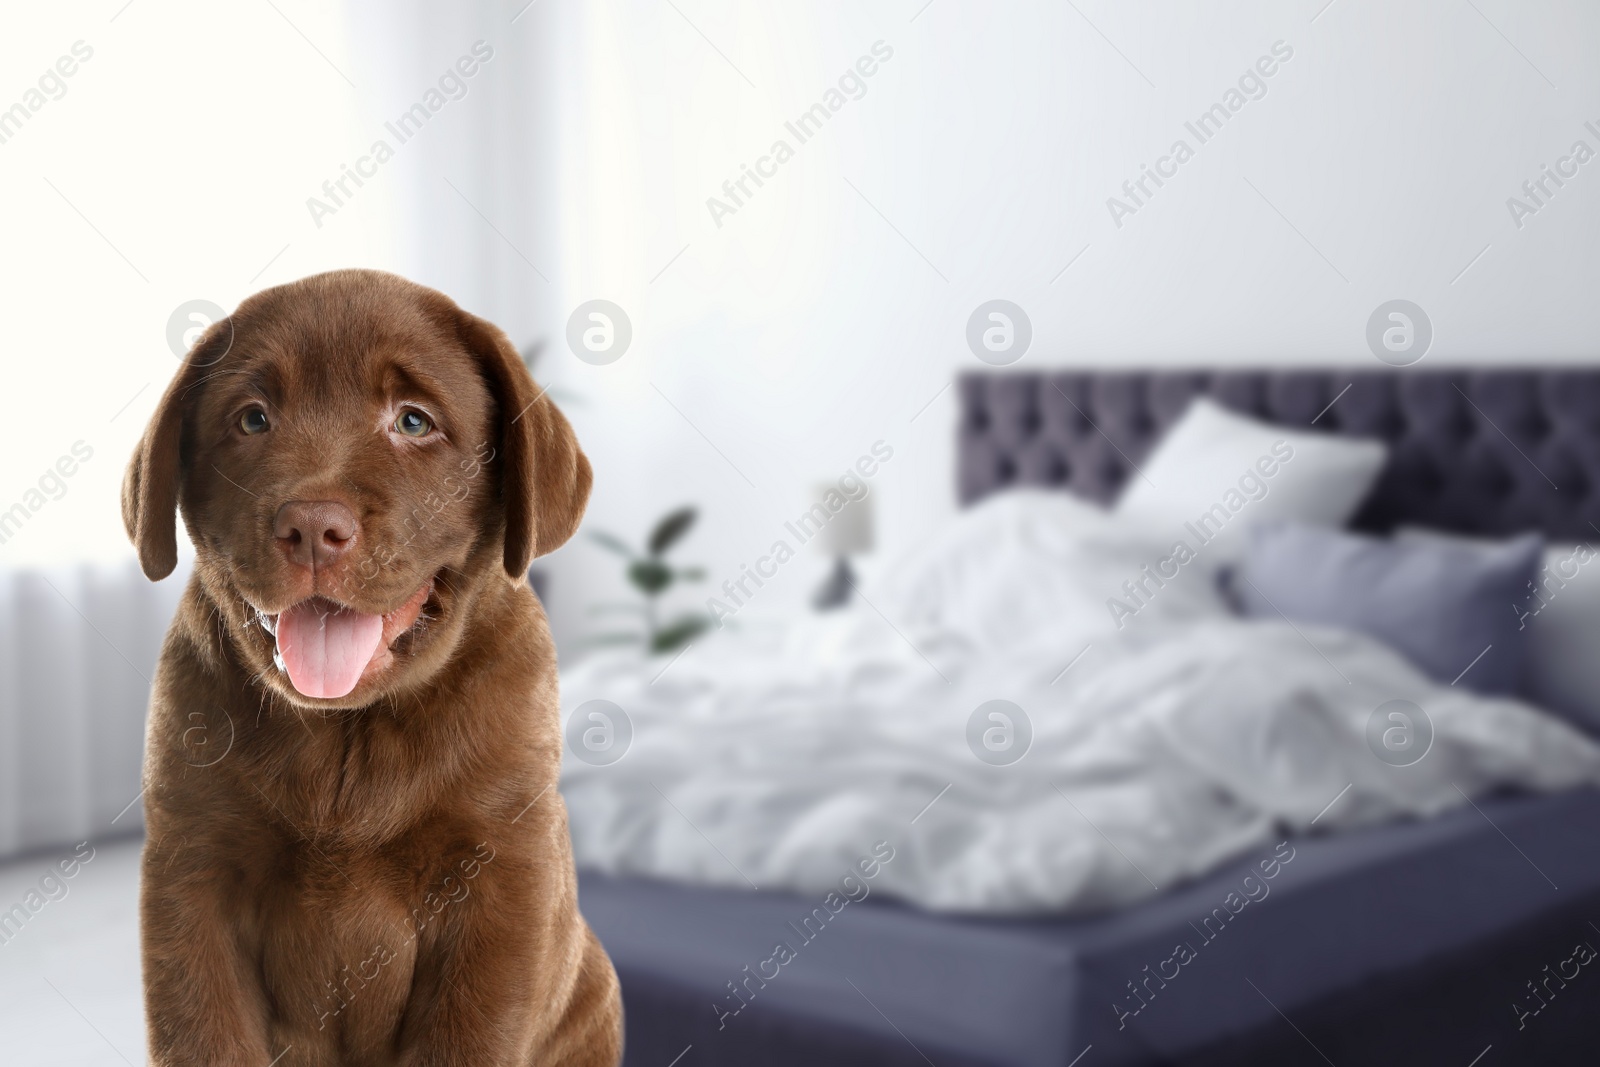 Image of Adorable puppy in bedroom, space for text. Pet friendly hotel